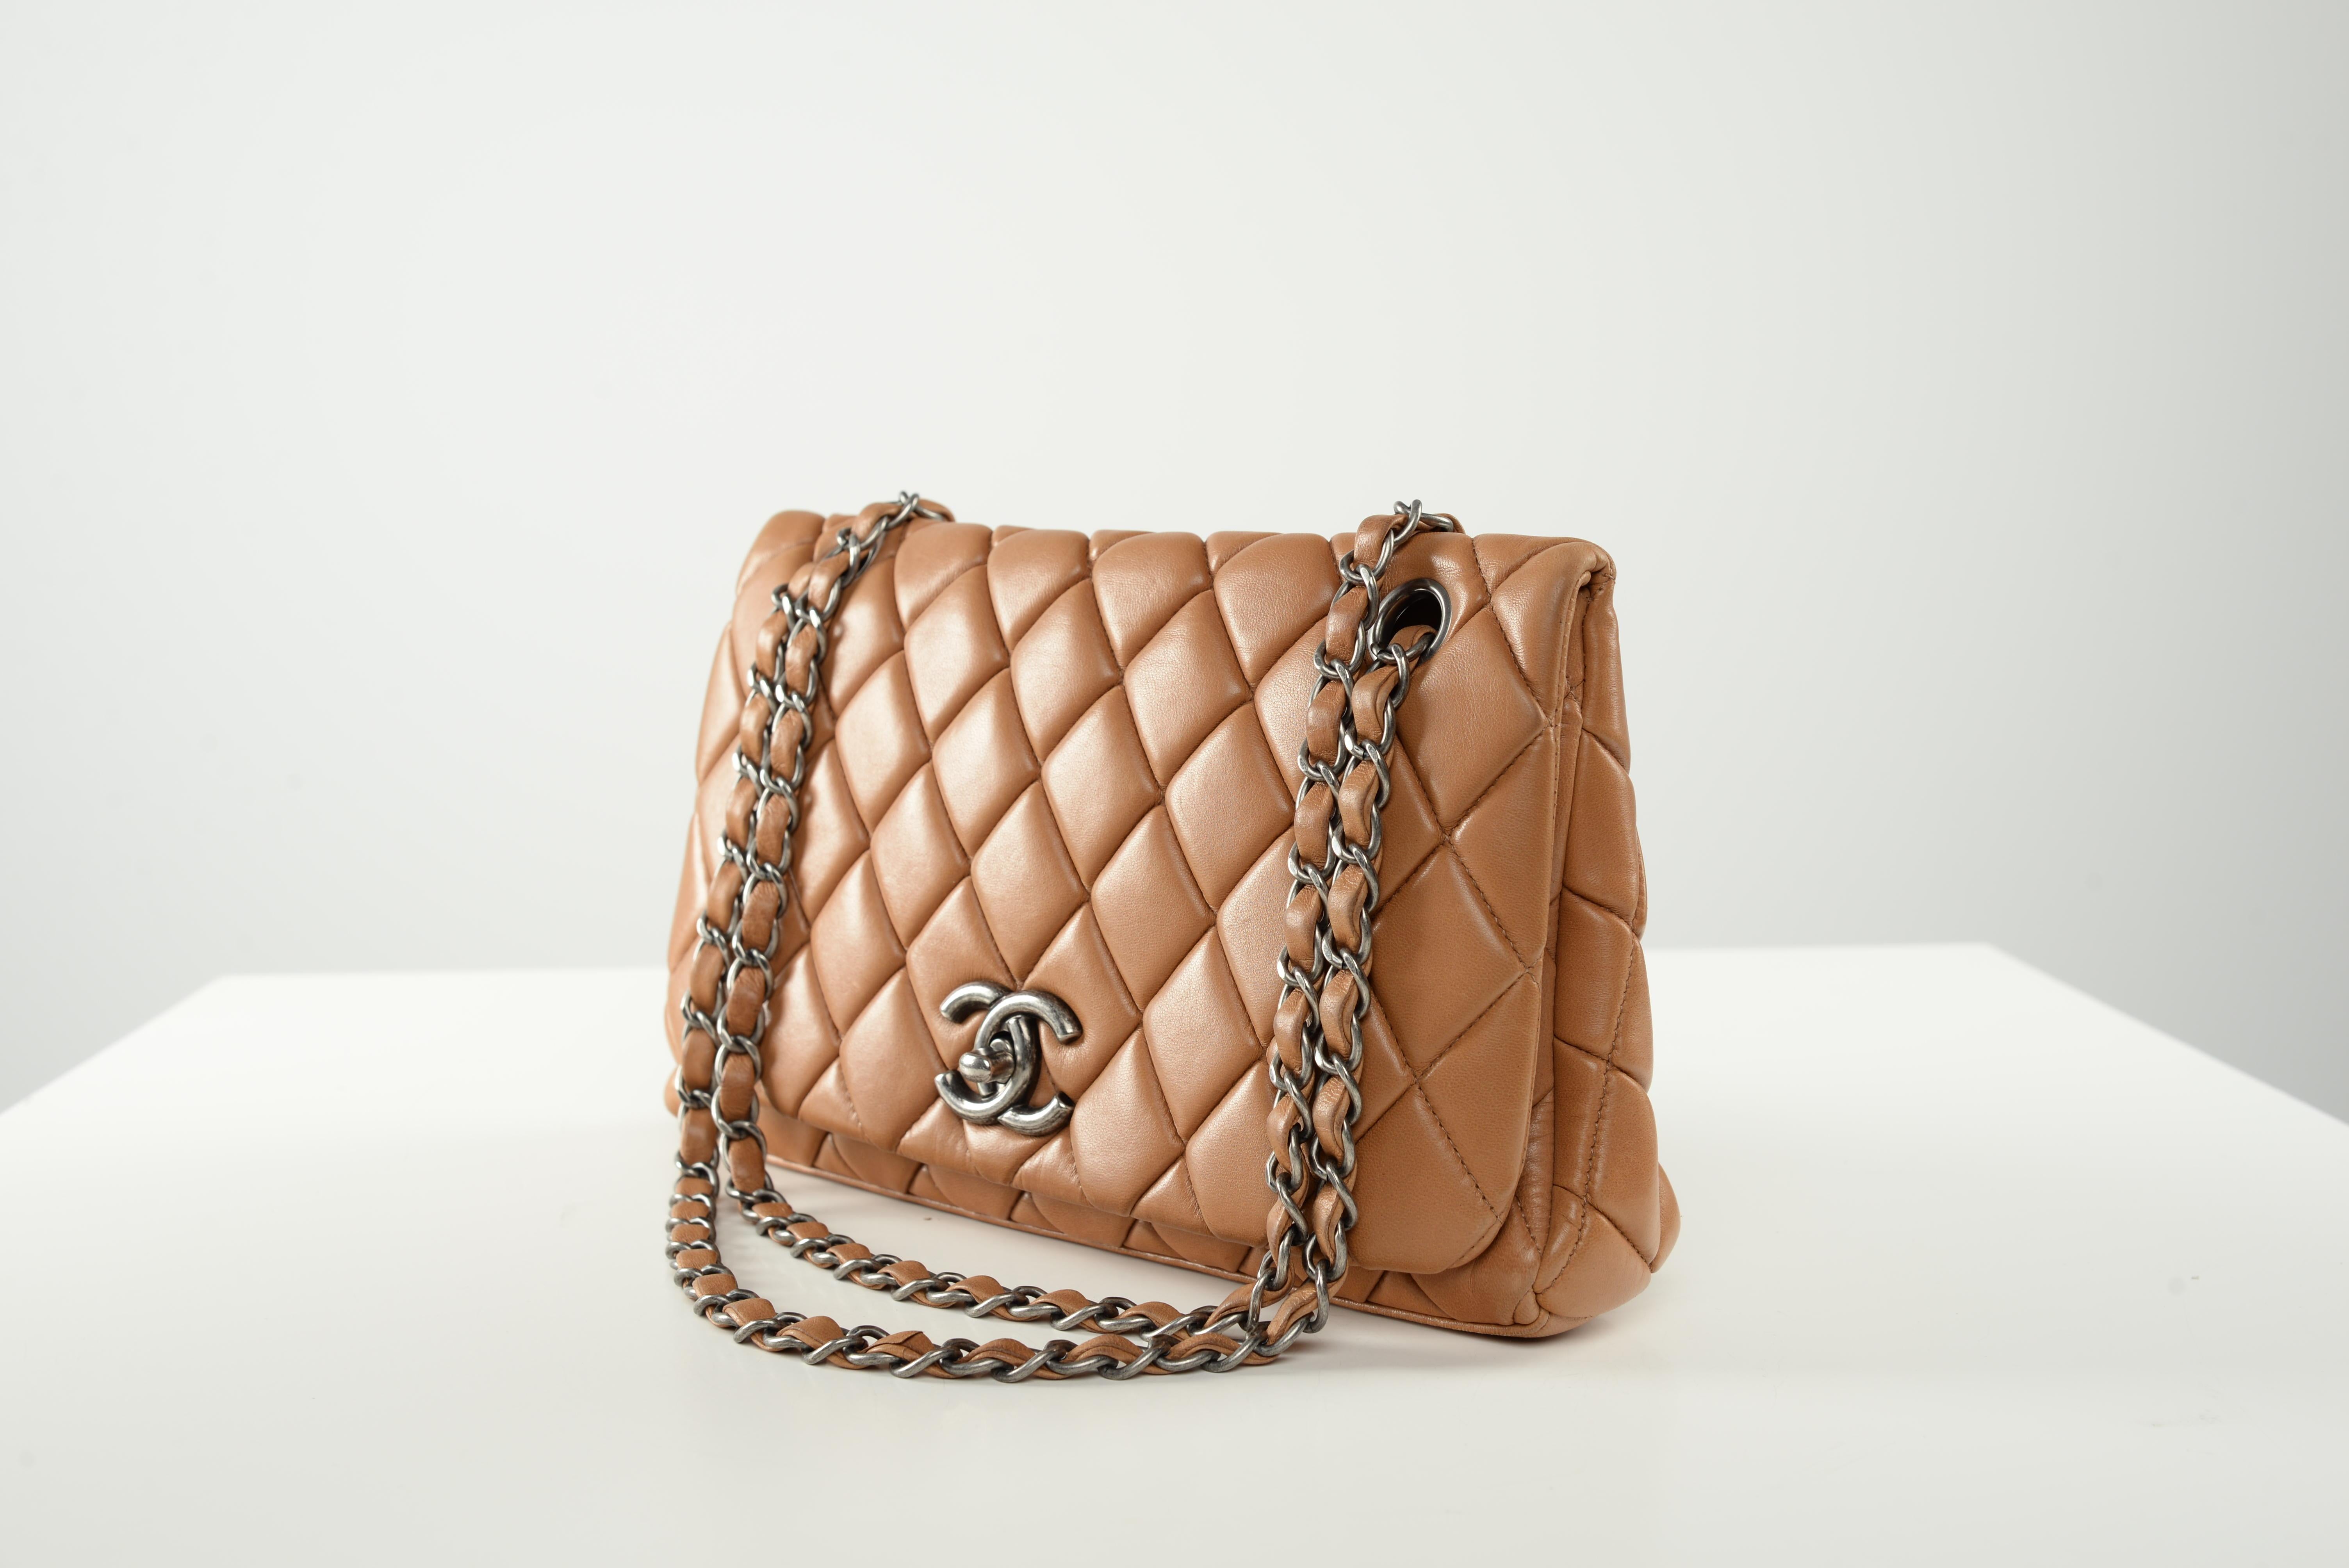 Chanel Quilted Single Flap Karl Lagerfeld Lambskin Bag 3